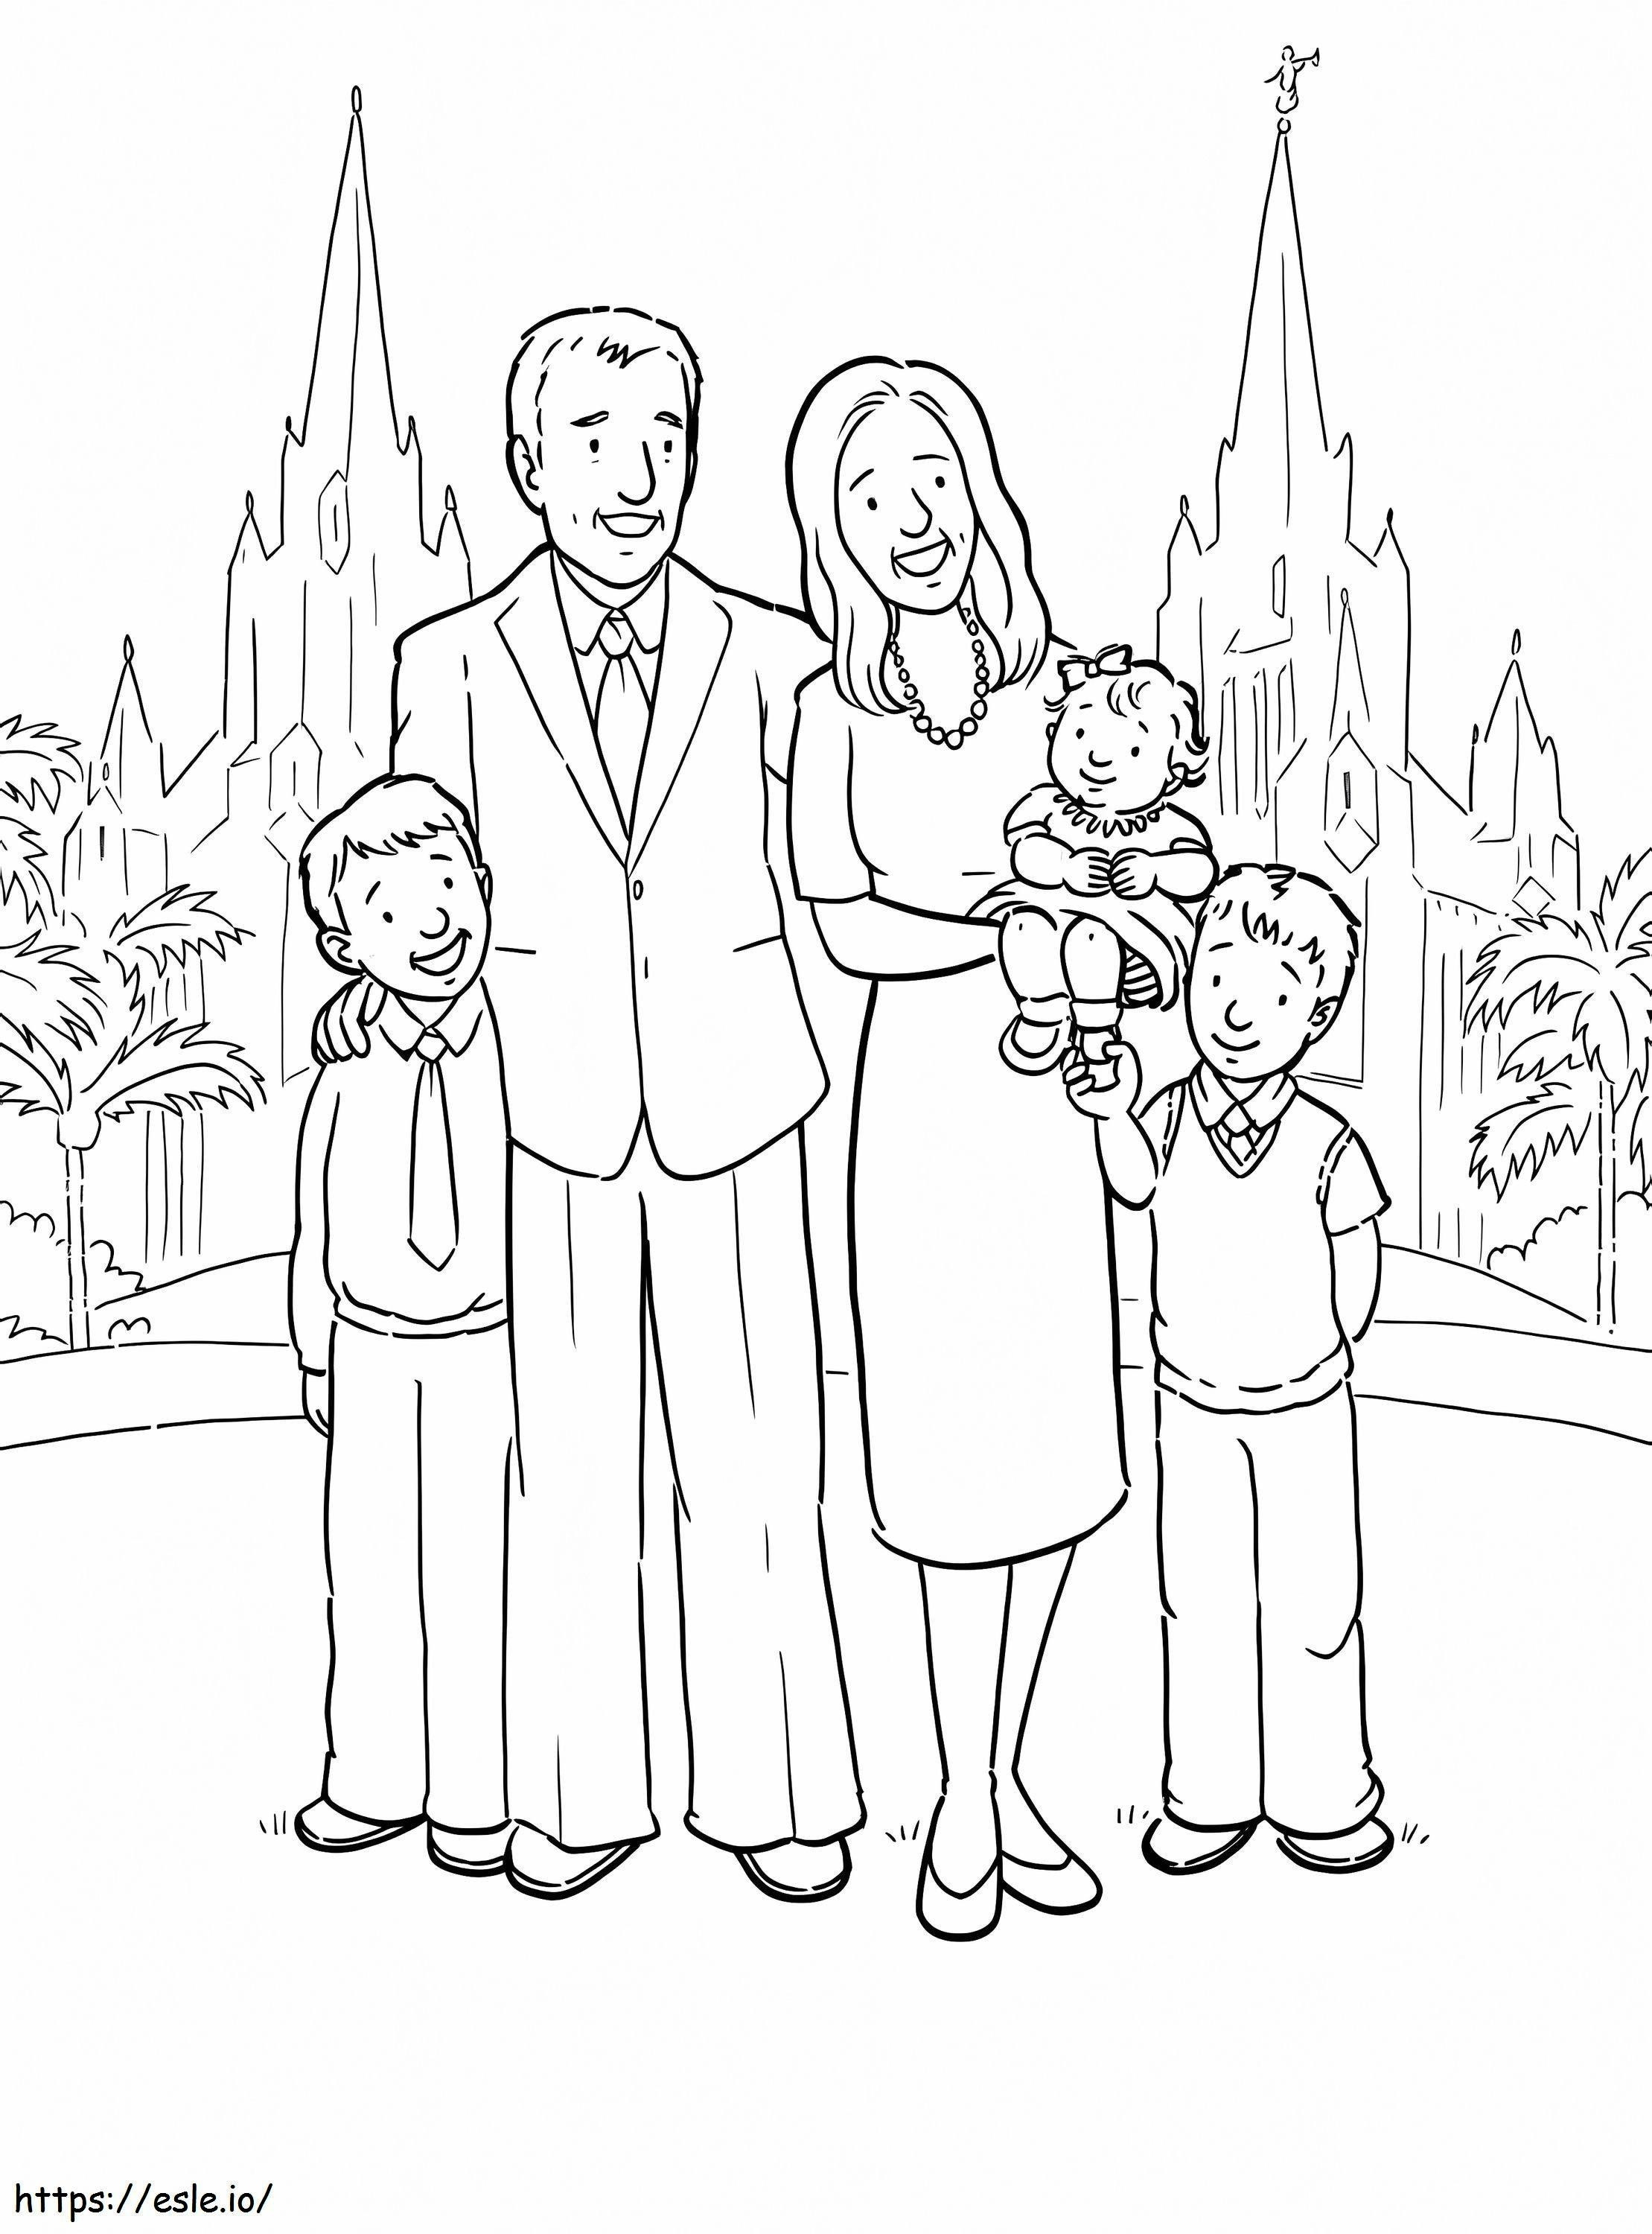 Family Goes To Church coloring page